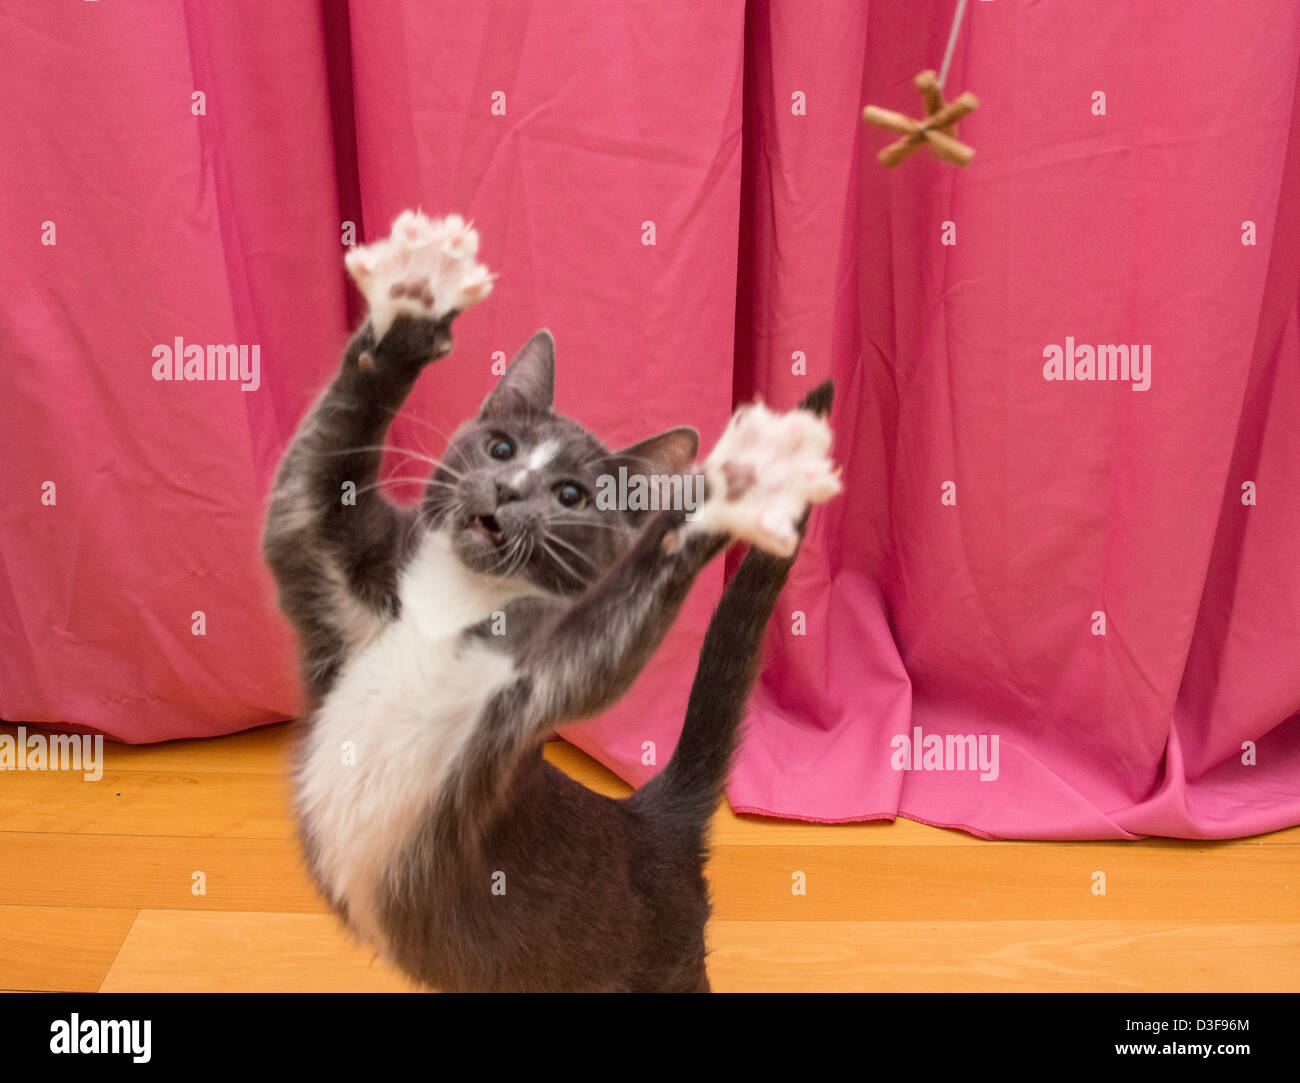 Young four month old gray and white tuxedo cat playing, paws extended to reach toy Stock Photo